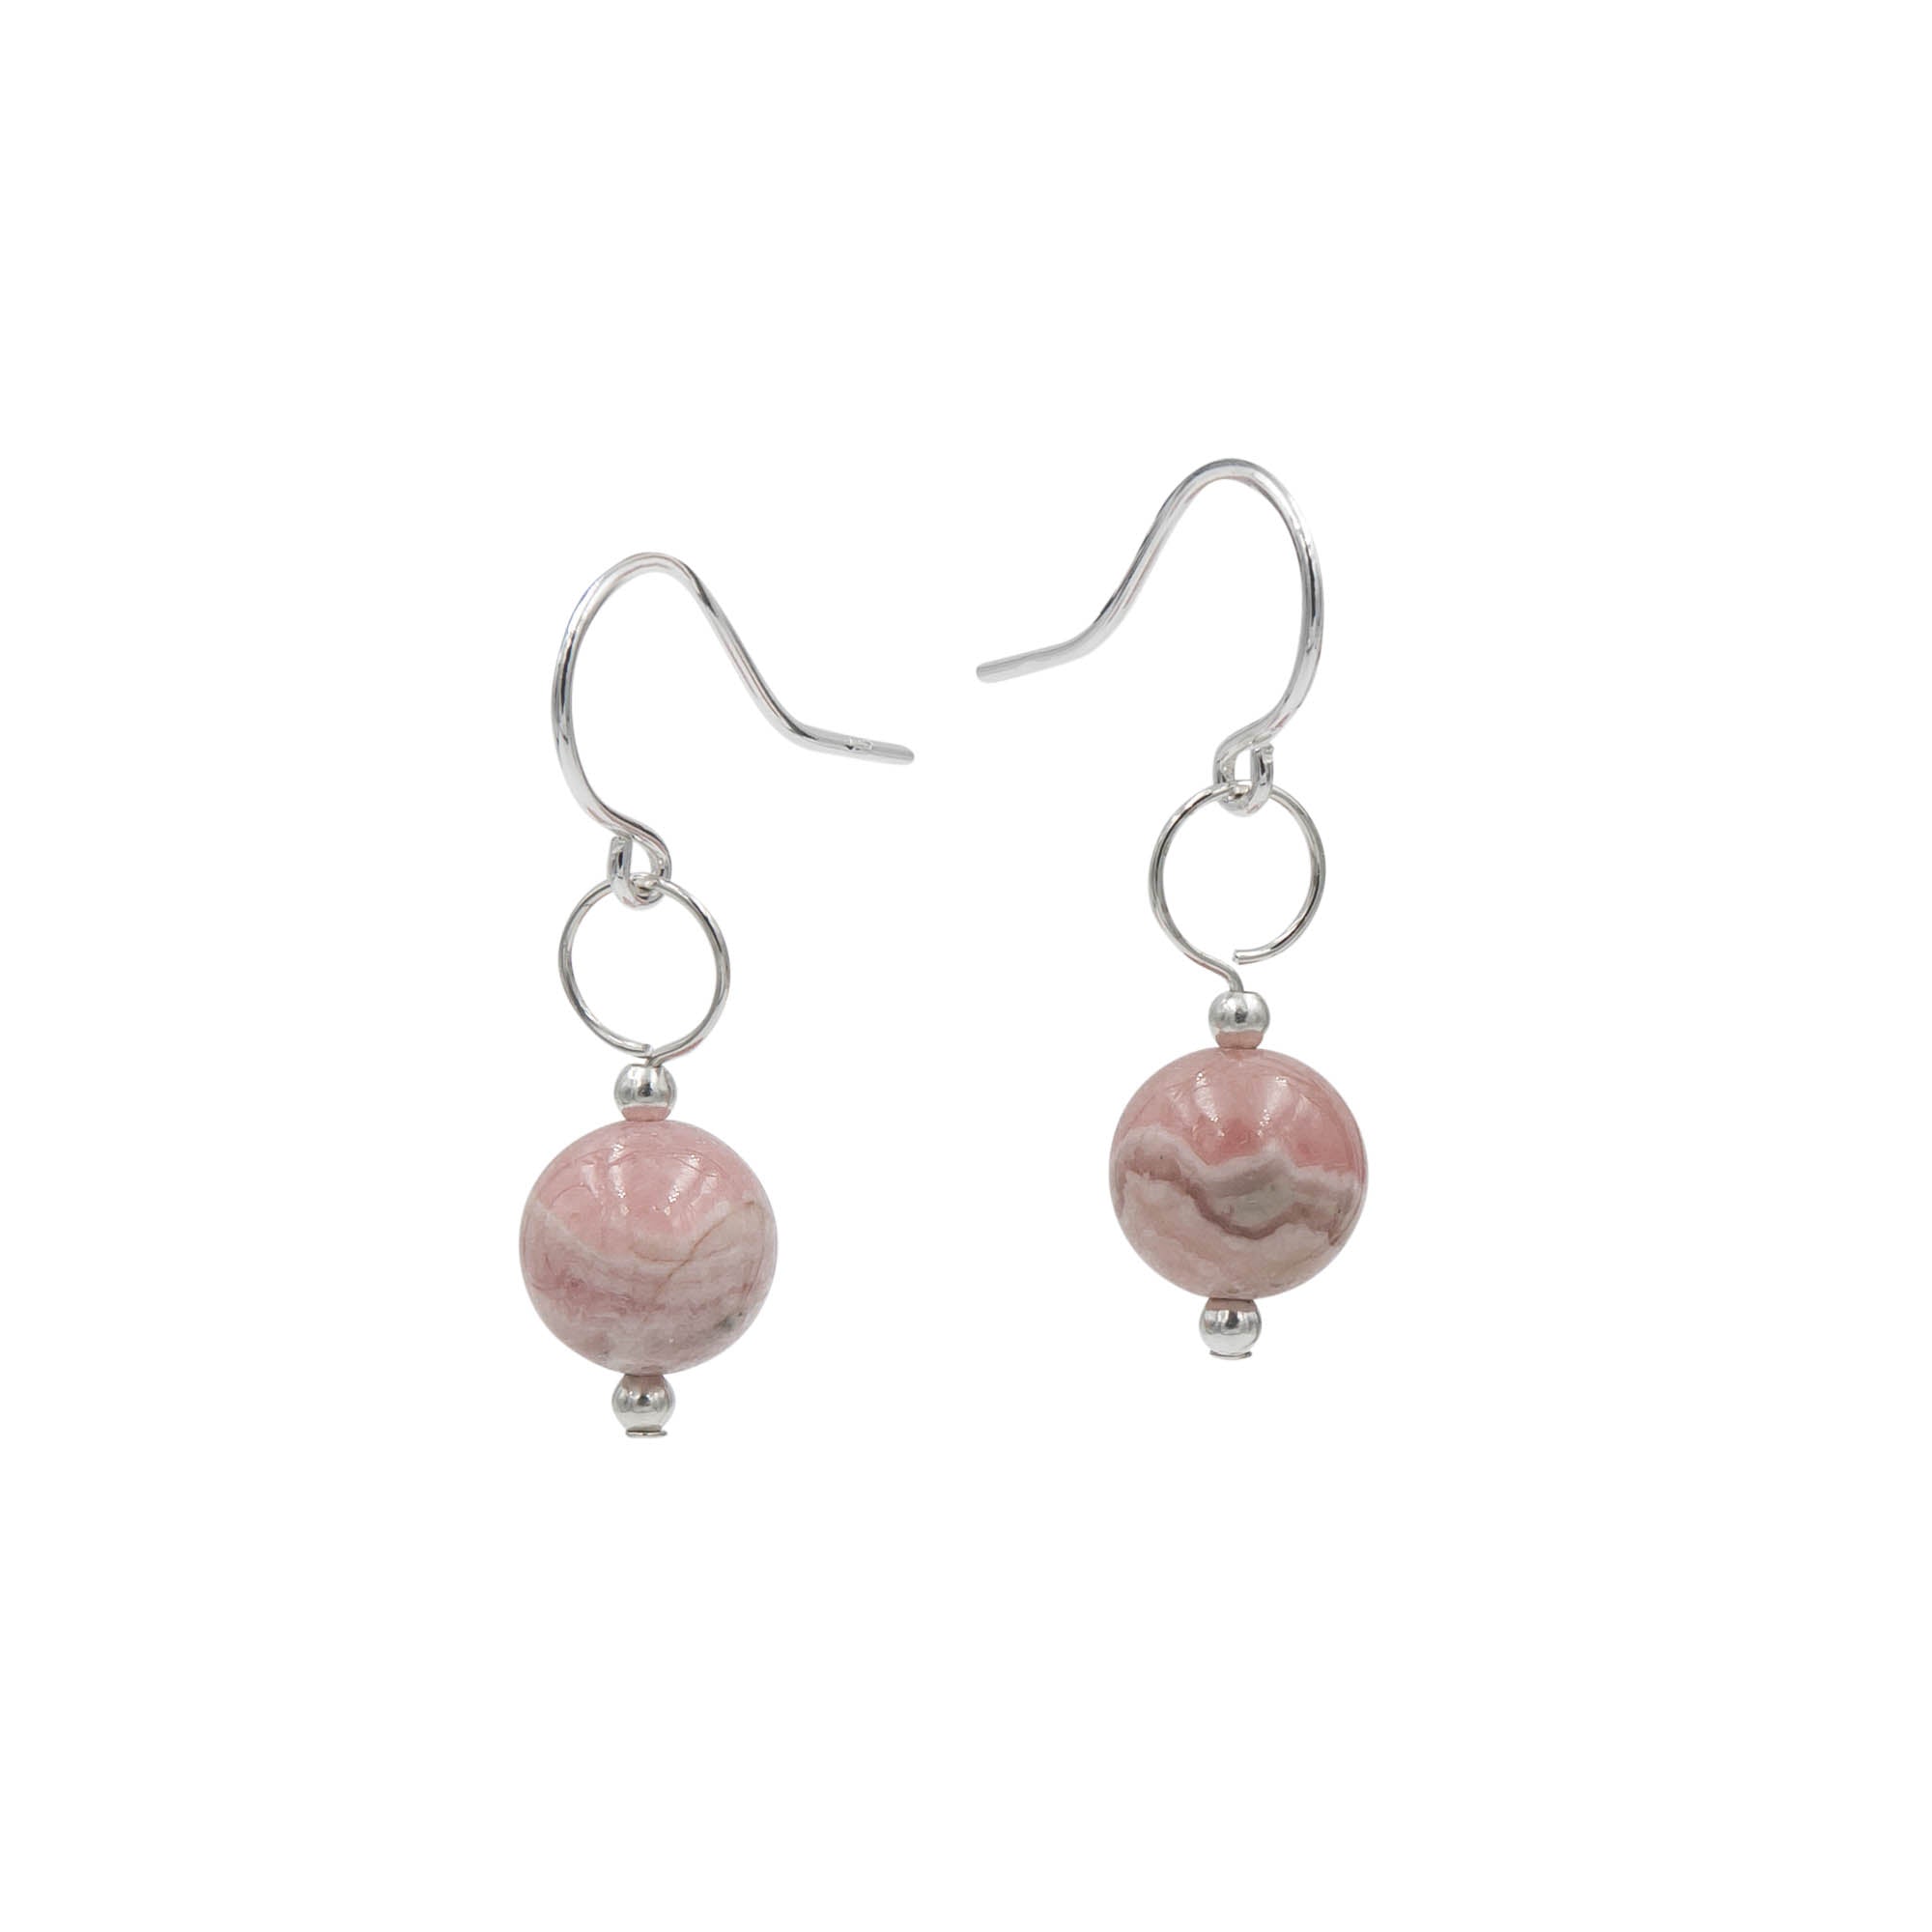 Earth Song Jewelry ~ Sterling Silver earrings with rare beauty, each uniquely marbled Rhodochrosite stone is a dance of various shades of pink .